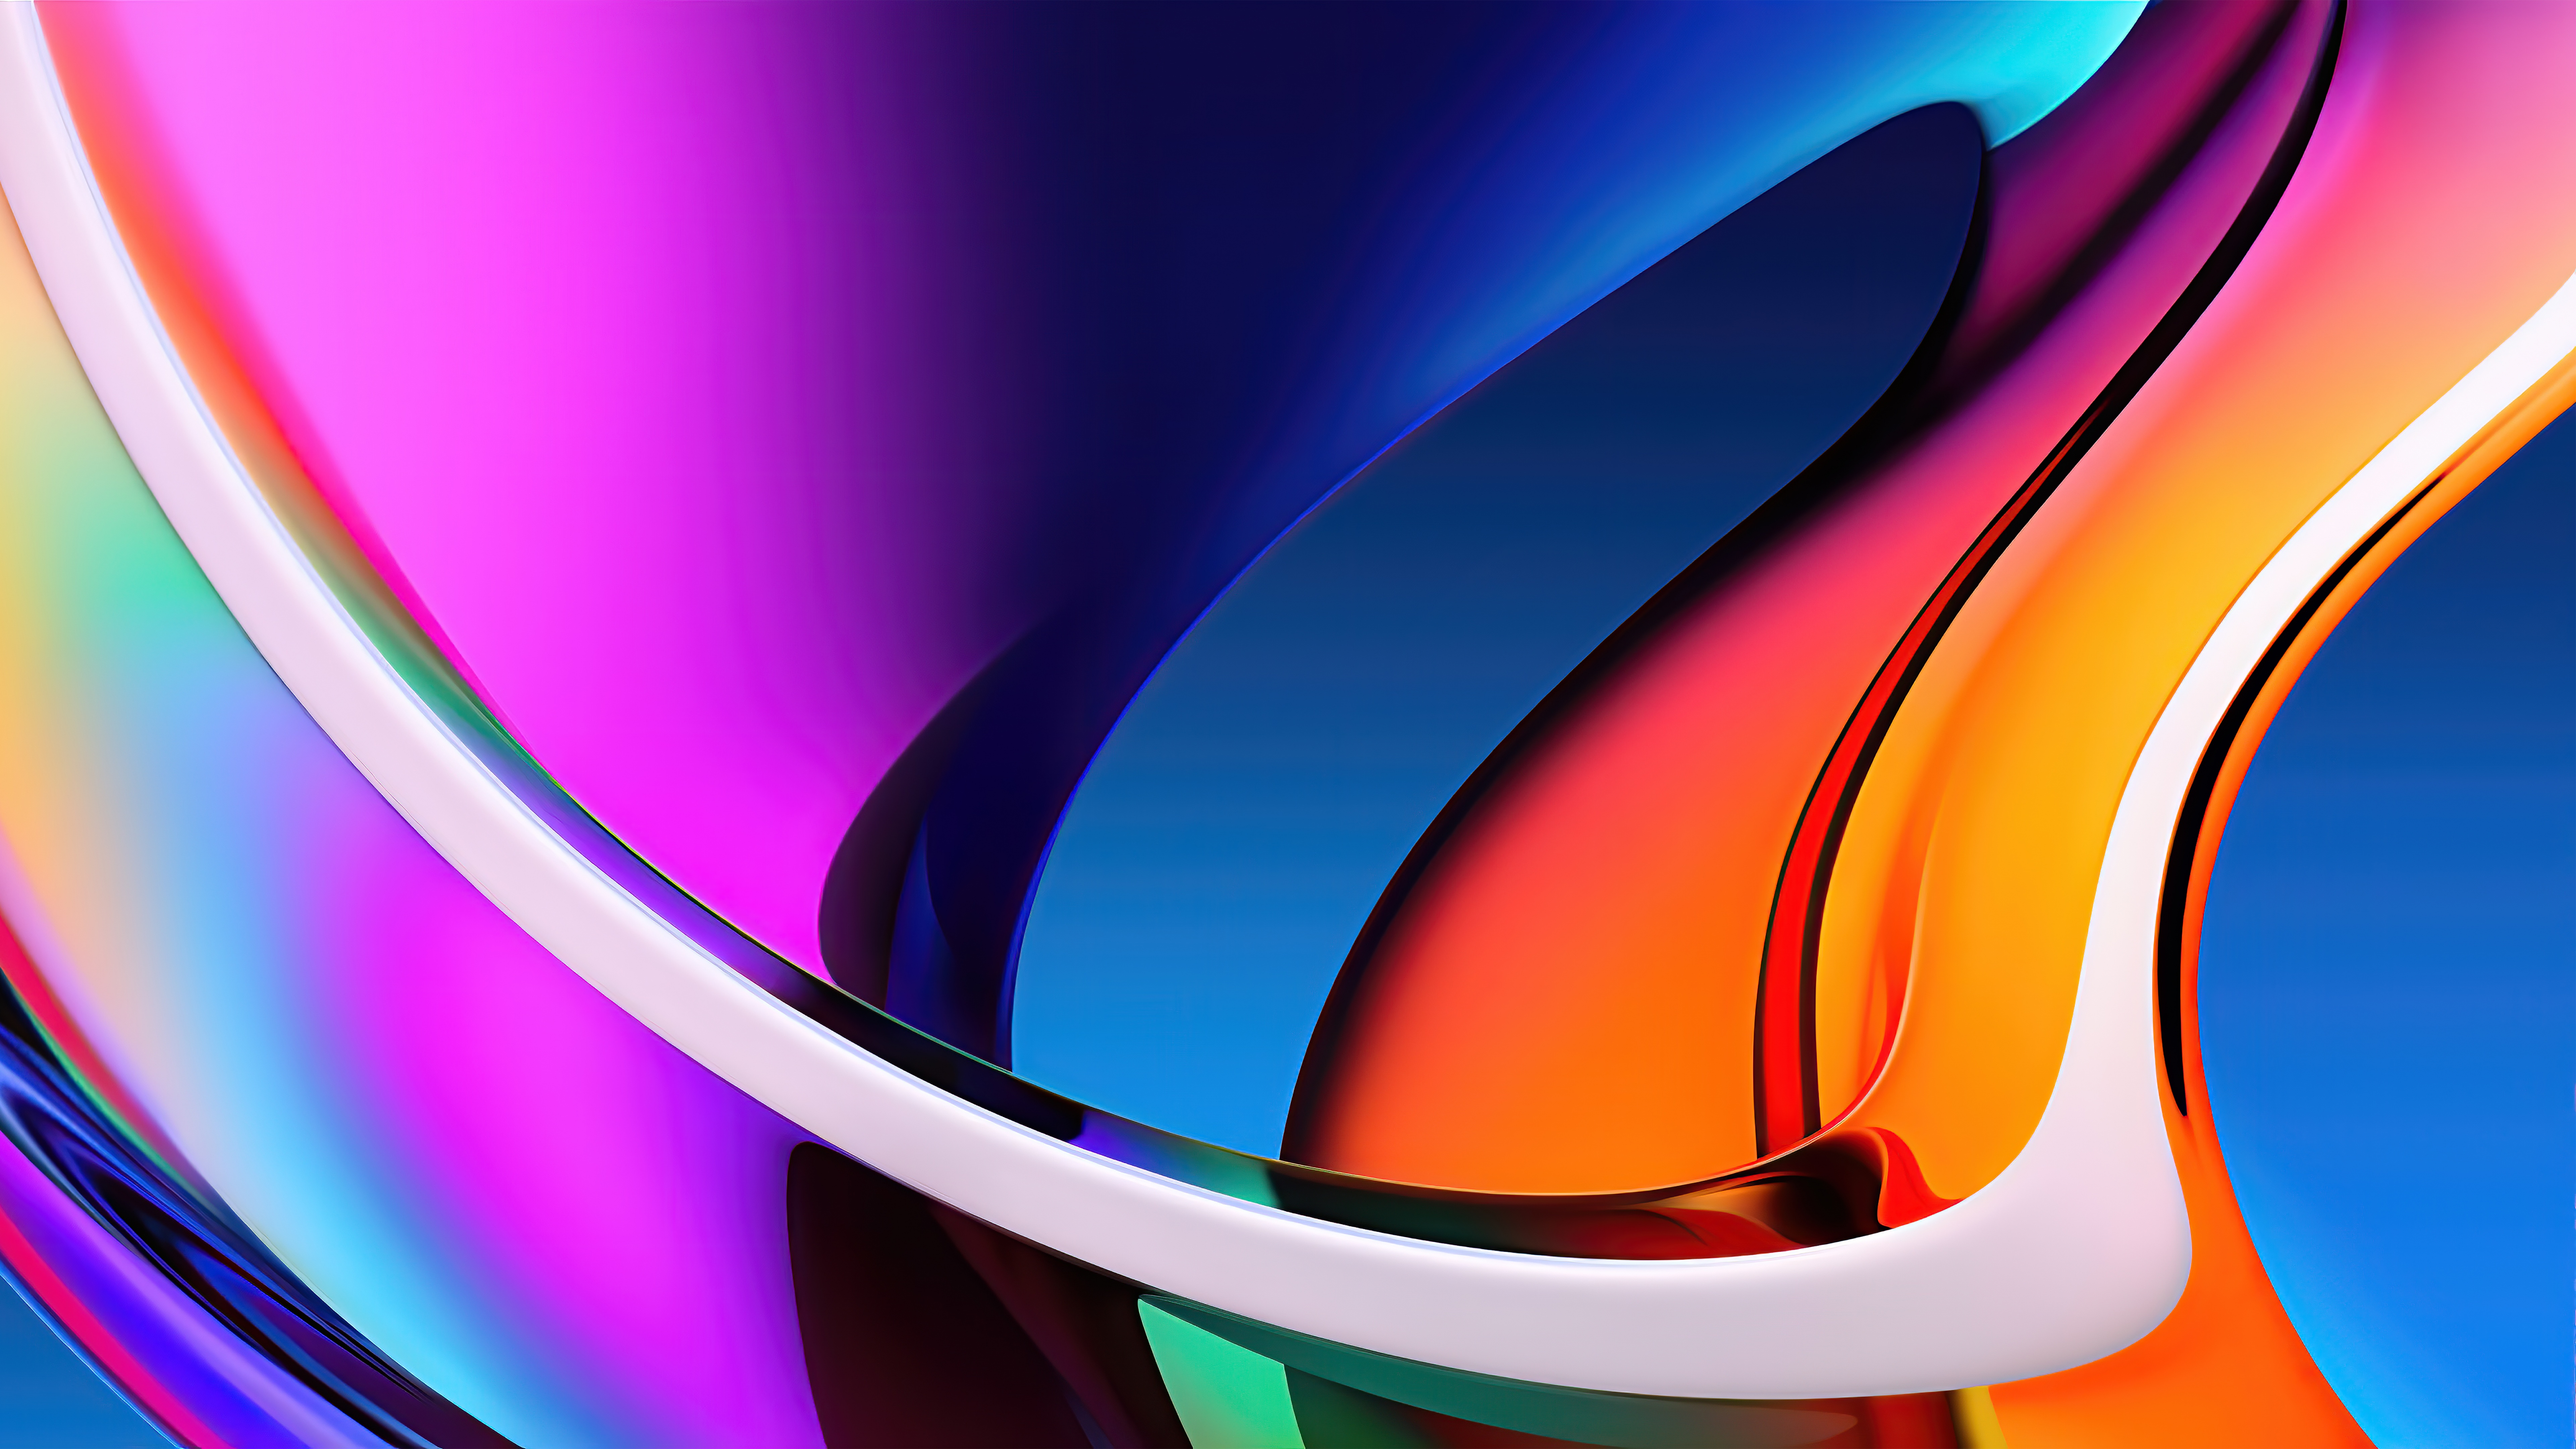 Apple iMac Wallpaper 4K, Colorful, Stock, Abstract